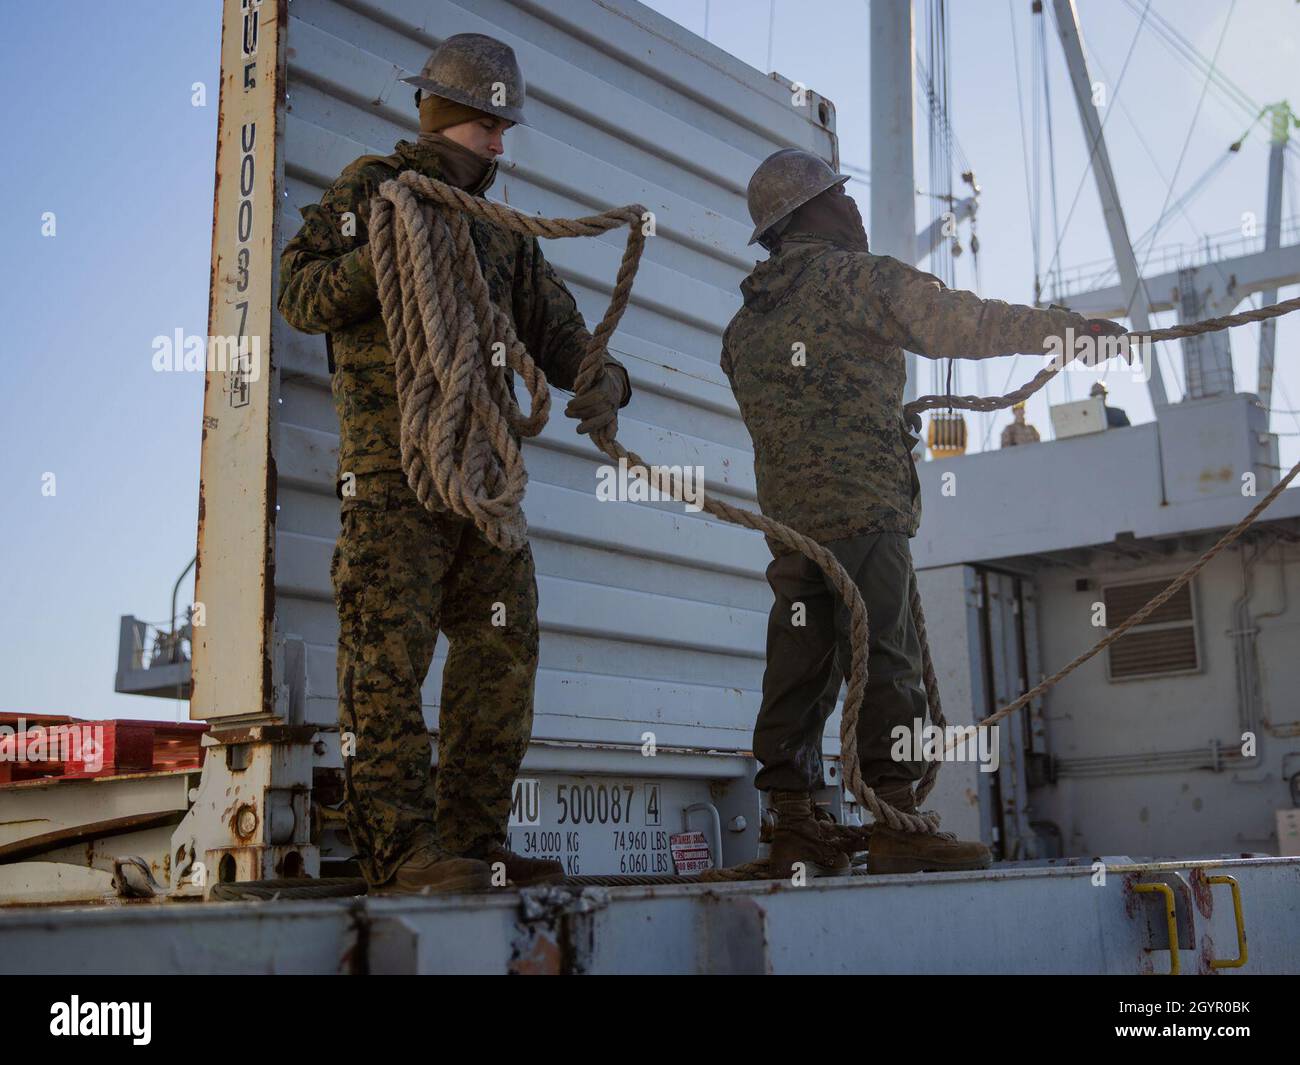 Marine Lance Cpl. Christopher Urban, left, and Cpl. William Hemphill pull rope while guiding a crane in support of exercise Carolina Patriot 2020 in Philadelphia, Pennsylvania, Jan. 22, 2020. The exercise ensures 2nd Marine Aircraft Wing’s proficiency and readiness in aviation logistics support operations. Urban is an aircraft intermediate level hydraulic/pneumatic mechanic with Marine Aviation Logistics Squadron (MALS) 26. Hemphill is an aircraft intermediate level structures mechanic with MALS-26. (U.S. Marine Corps photo by Cpl. Cody Rowe) Stock Photo